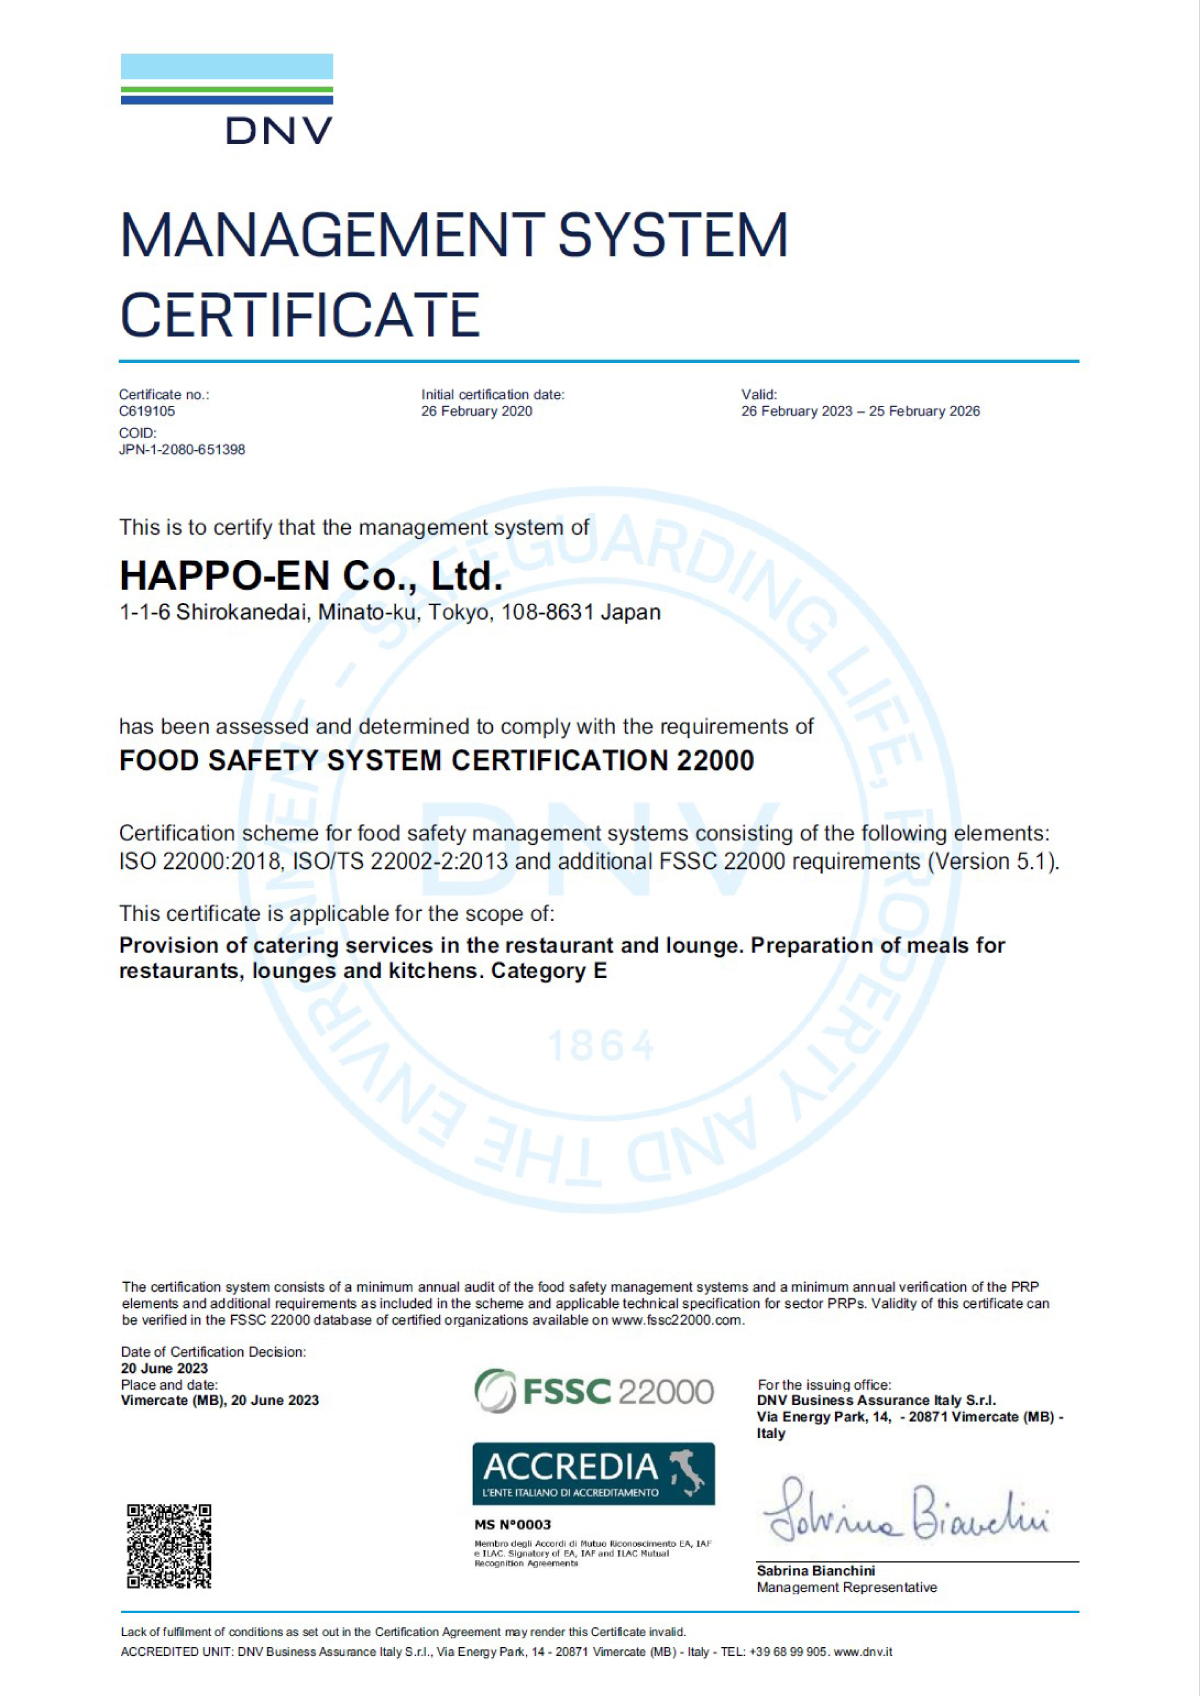 The second company in Japan to receive the FSSC 22000 certification (Category E)